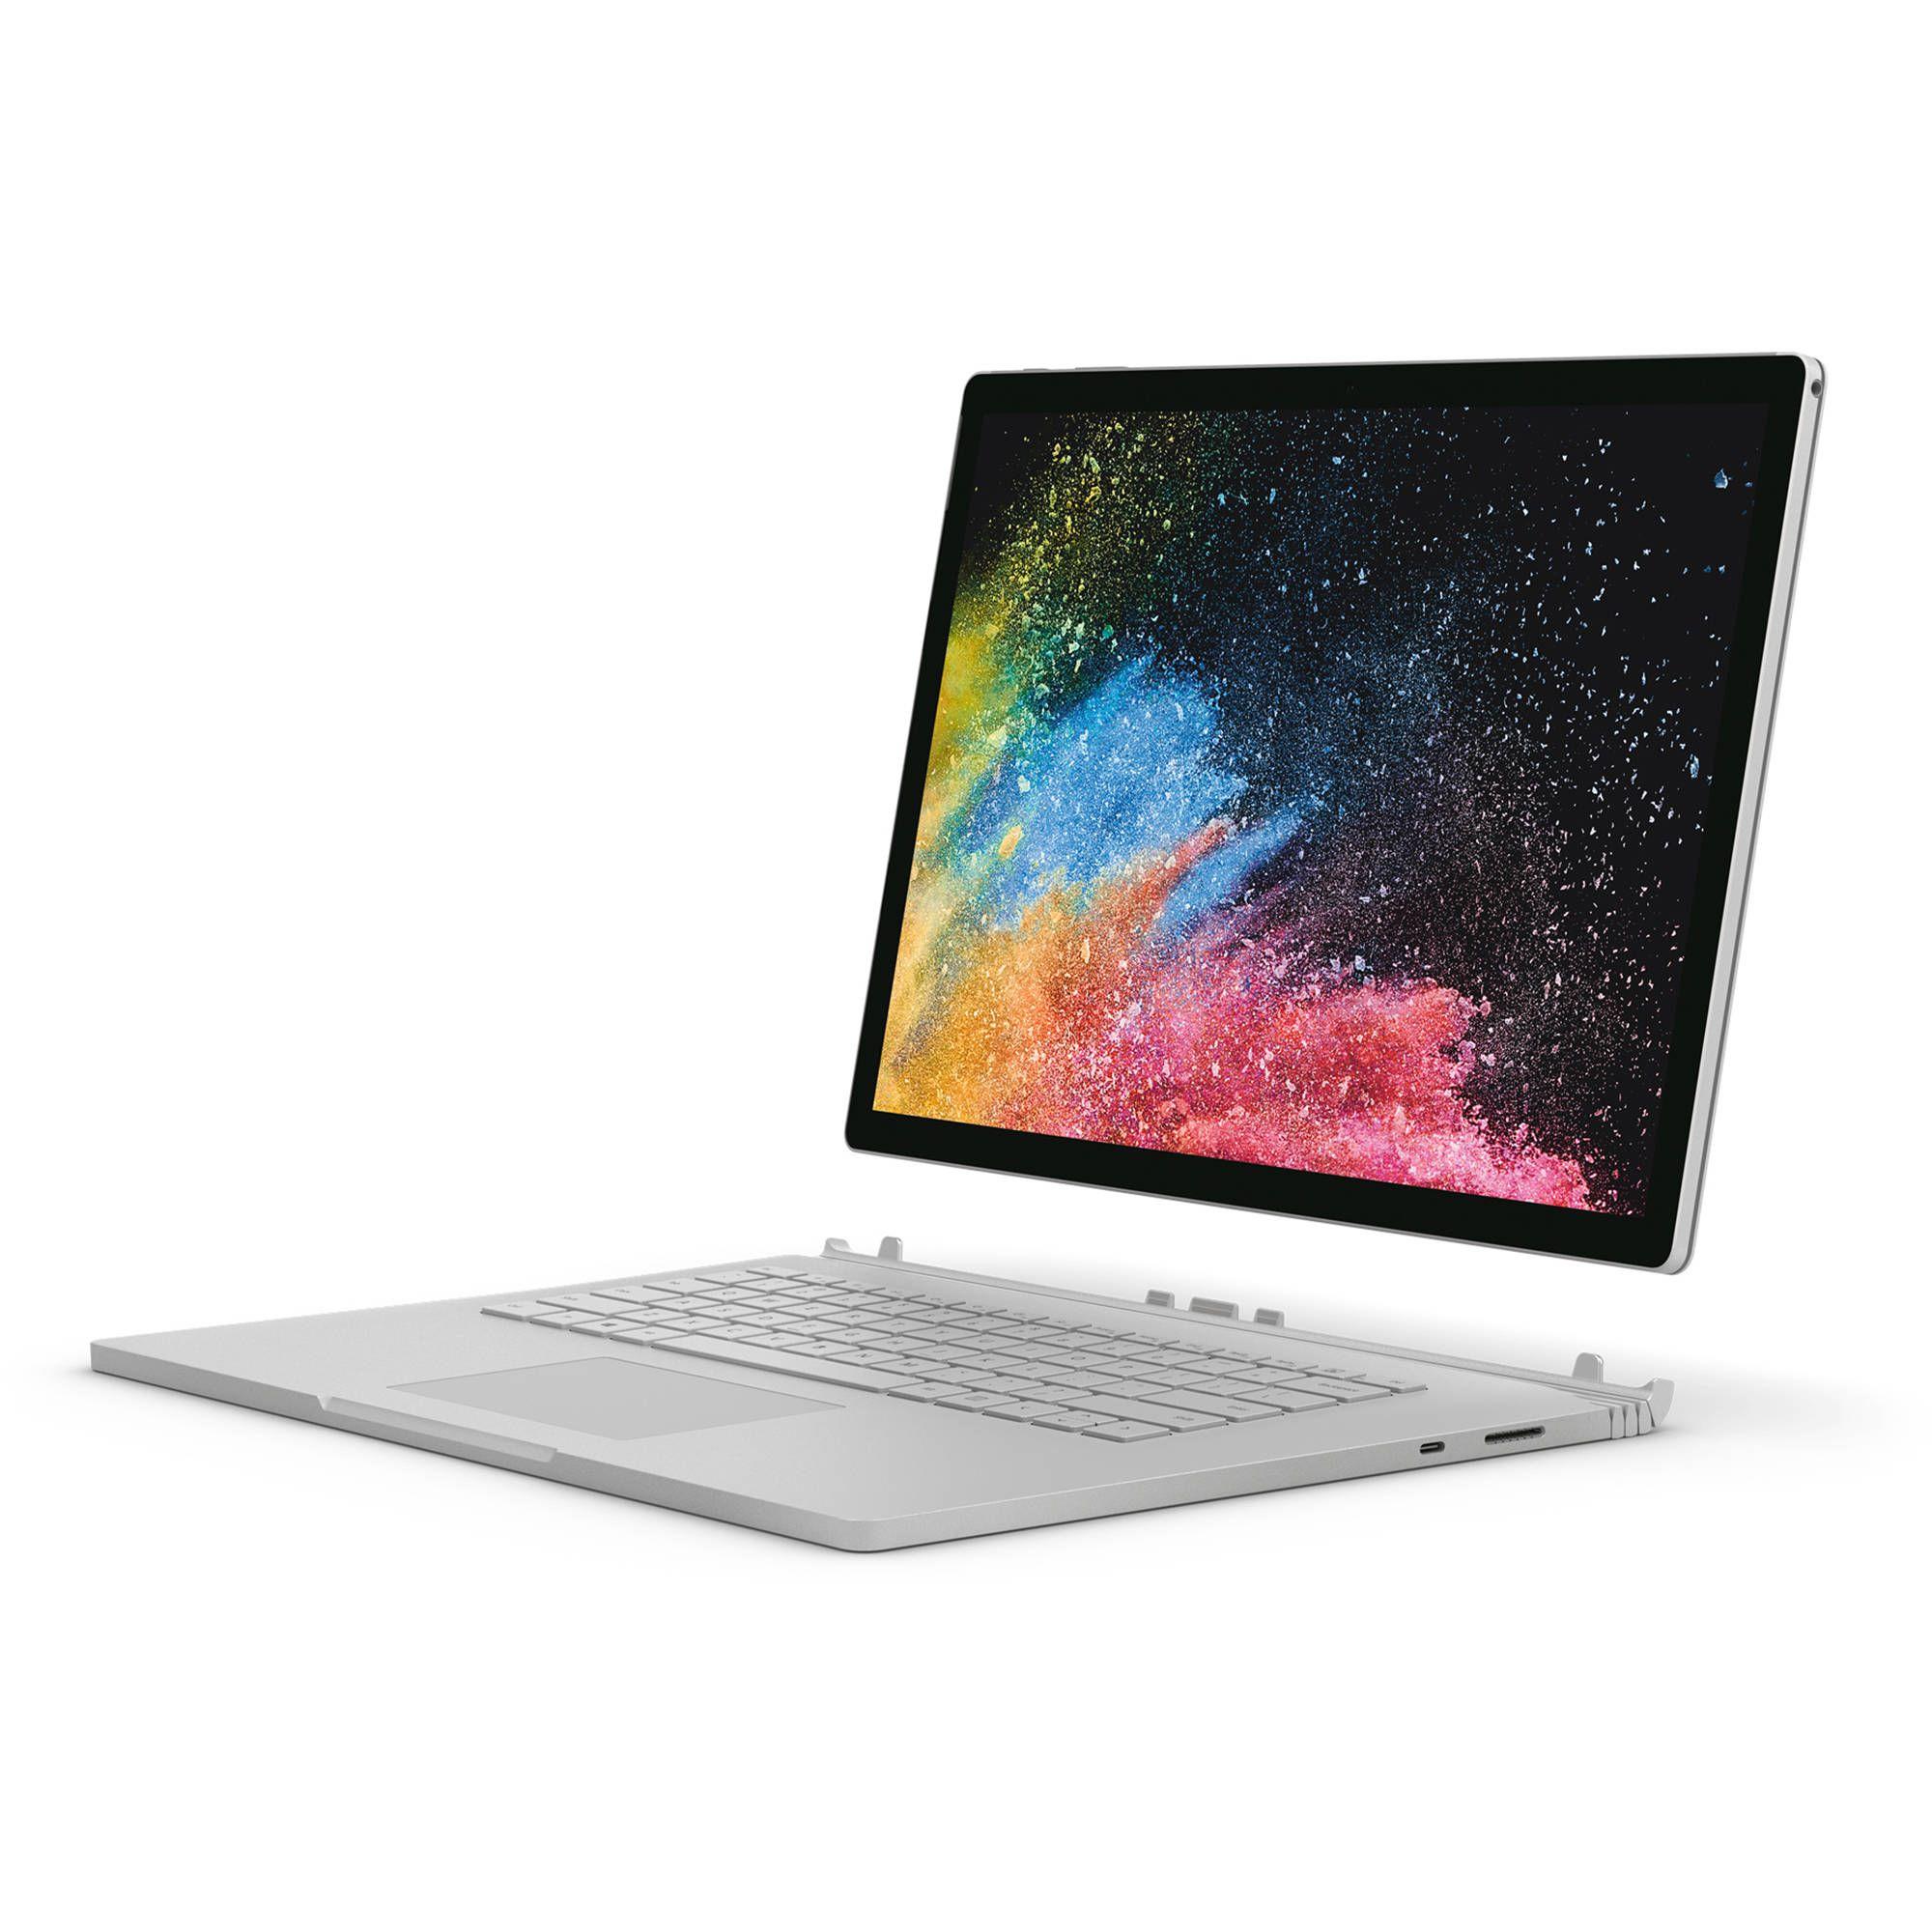 Microsoft Surface Book Logo - Microsoft 15 Surface Book 2 Multi Touch 2 In 1 HNR 00001